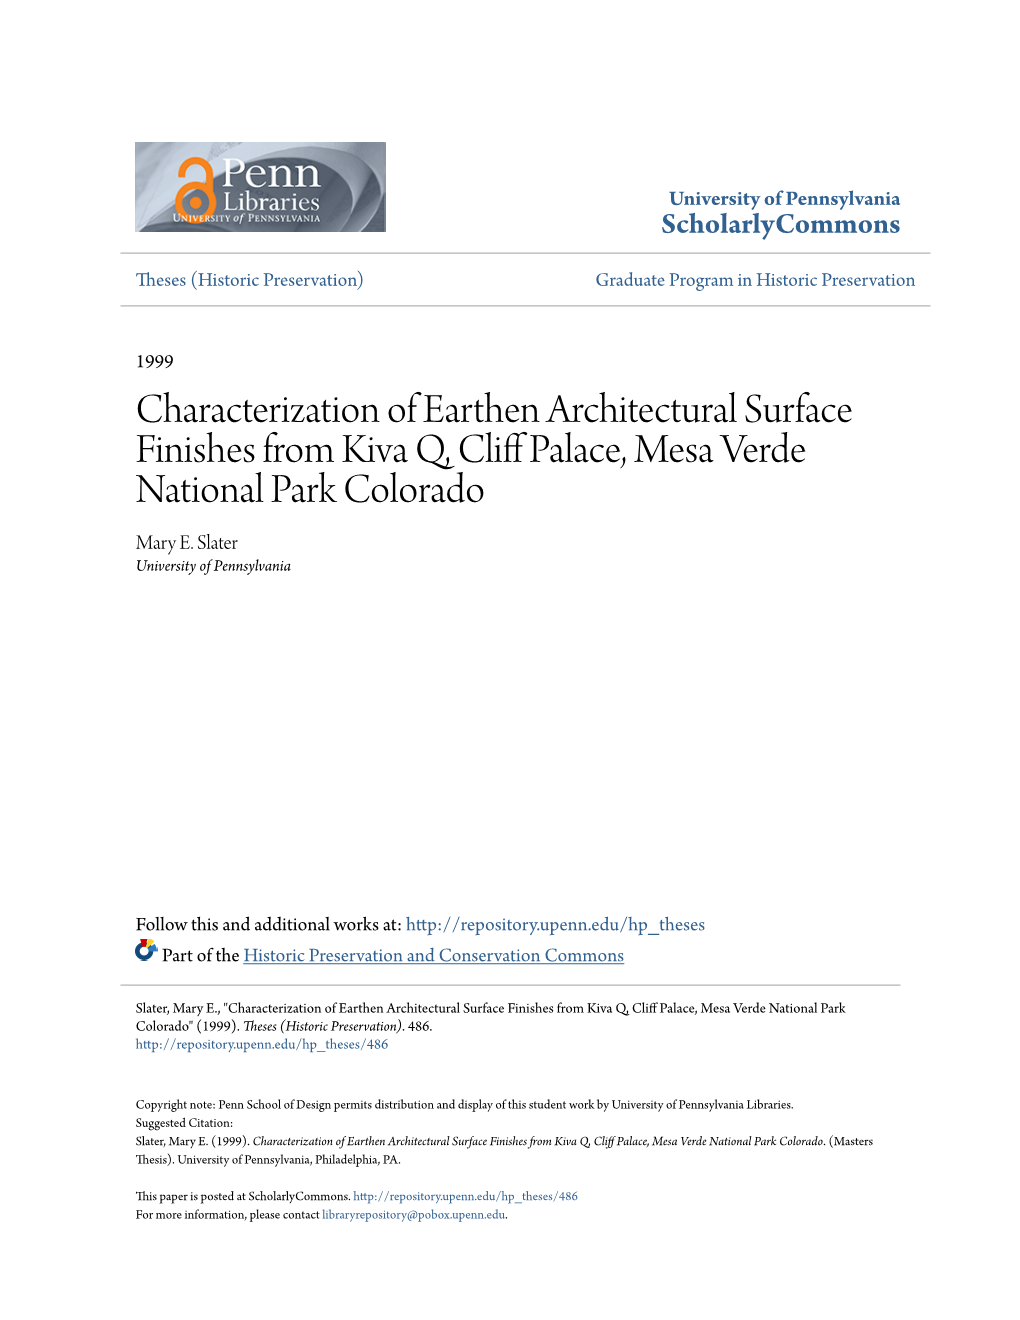 Characterization of Earthen Architectural Surface Finishes from Kiva Q, Cliff Alp Ace, Mesa Verde National Park Colorado Mary E